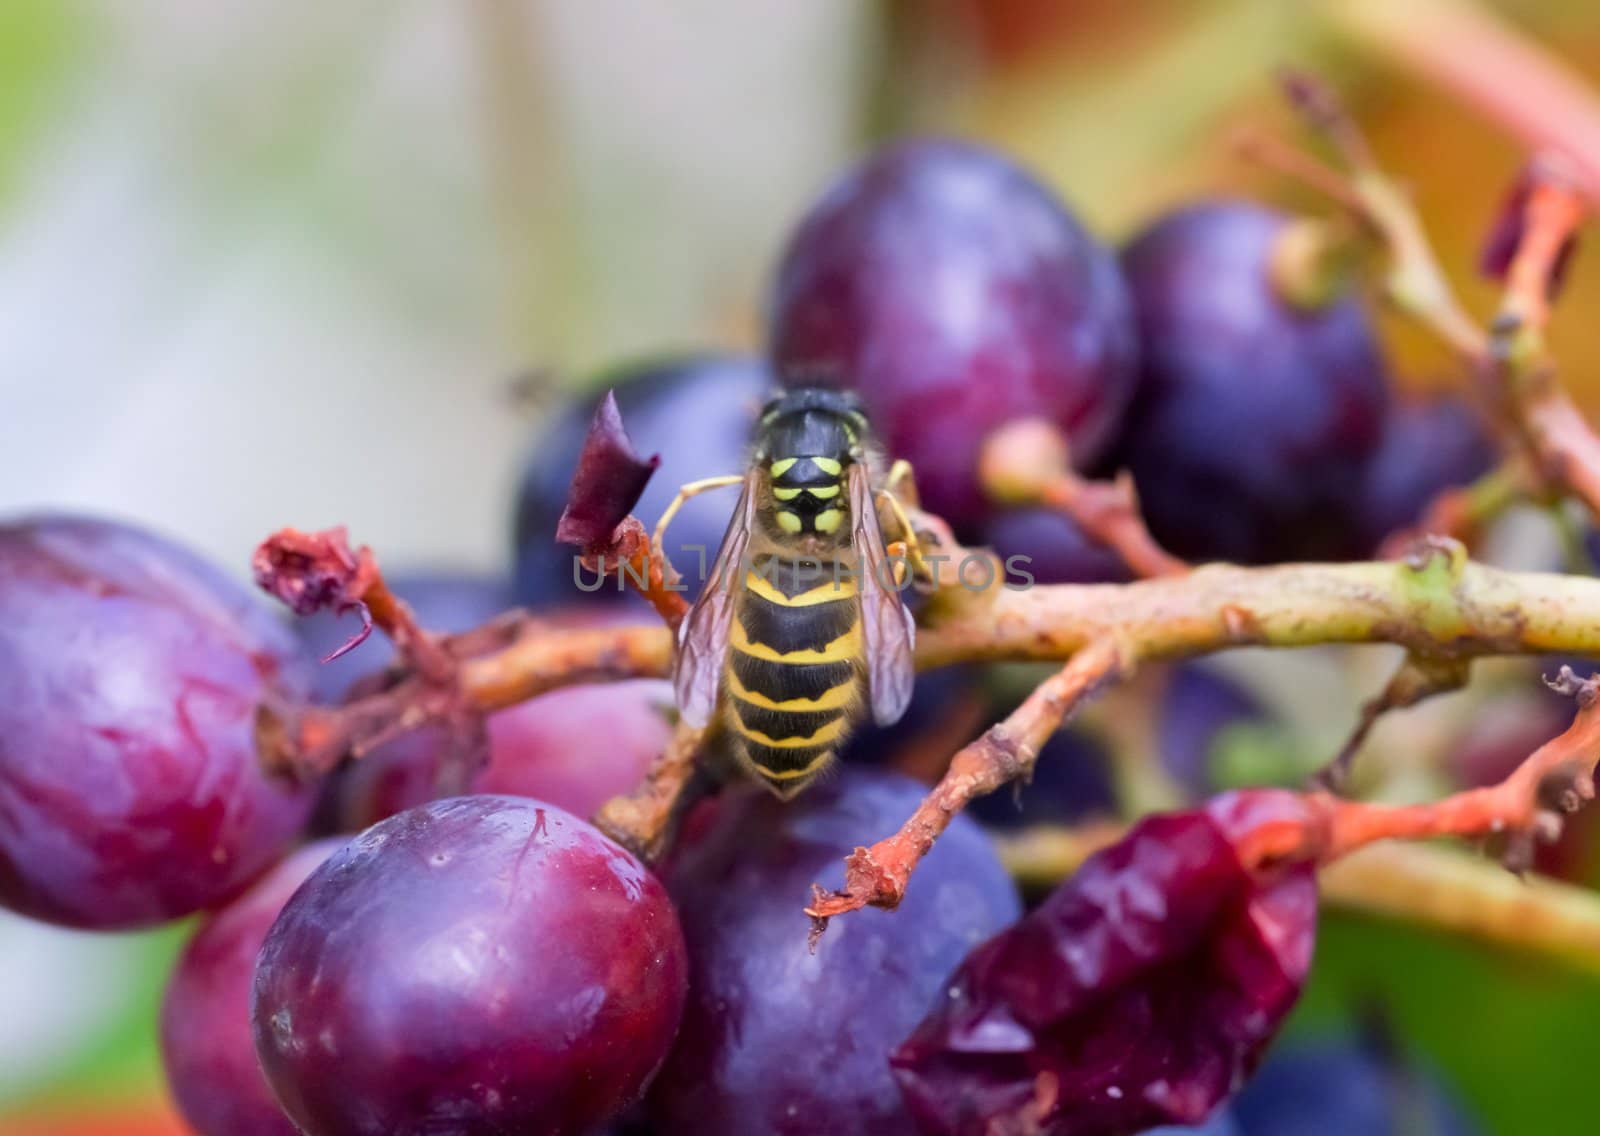 wasp on grapes by FotoFrank